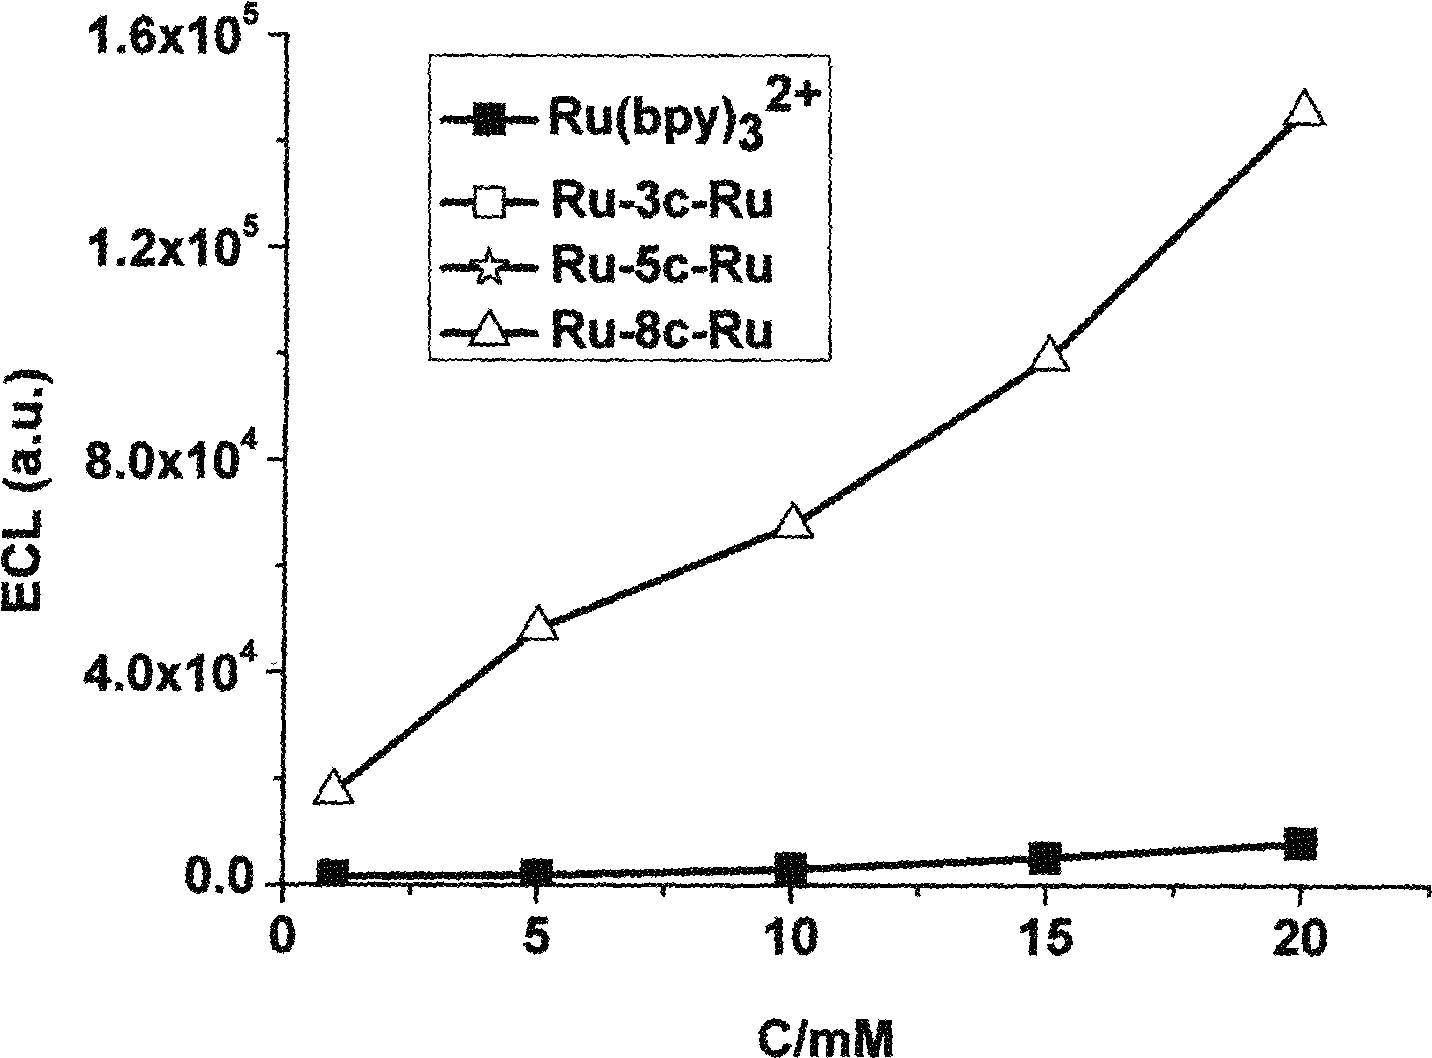 ECL marker of binuclear bipyridyl ruthenium/osmium connected by saturated carbon chains of different lengths